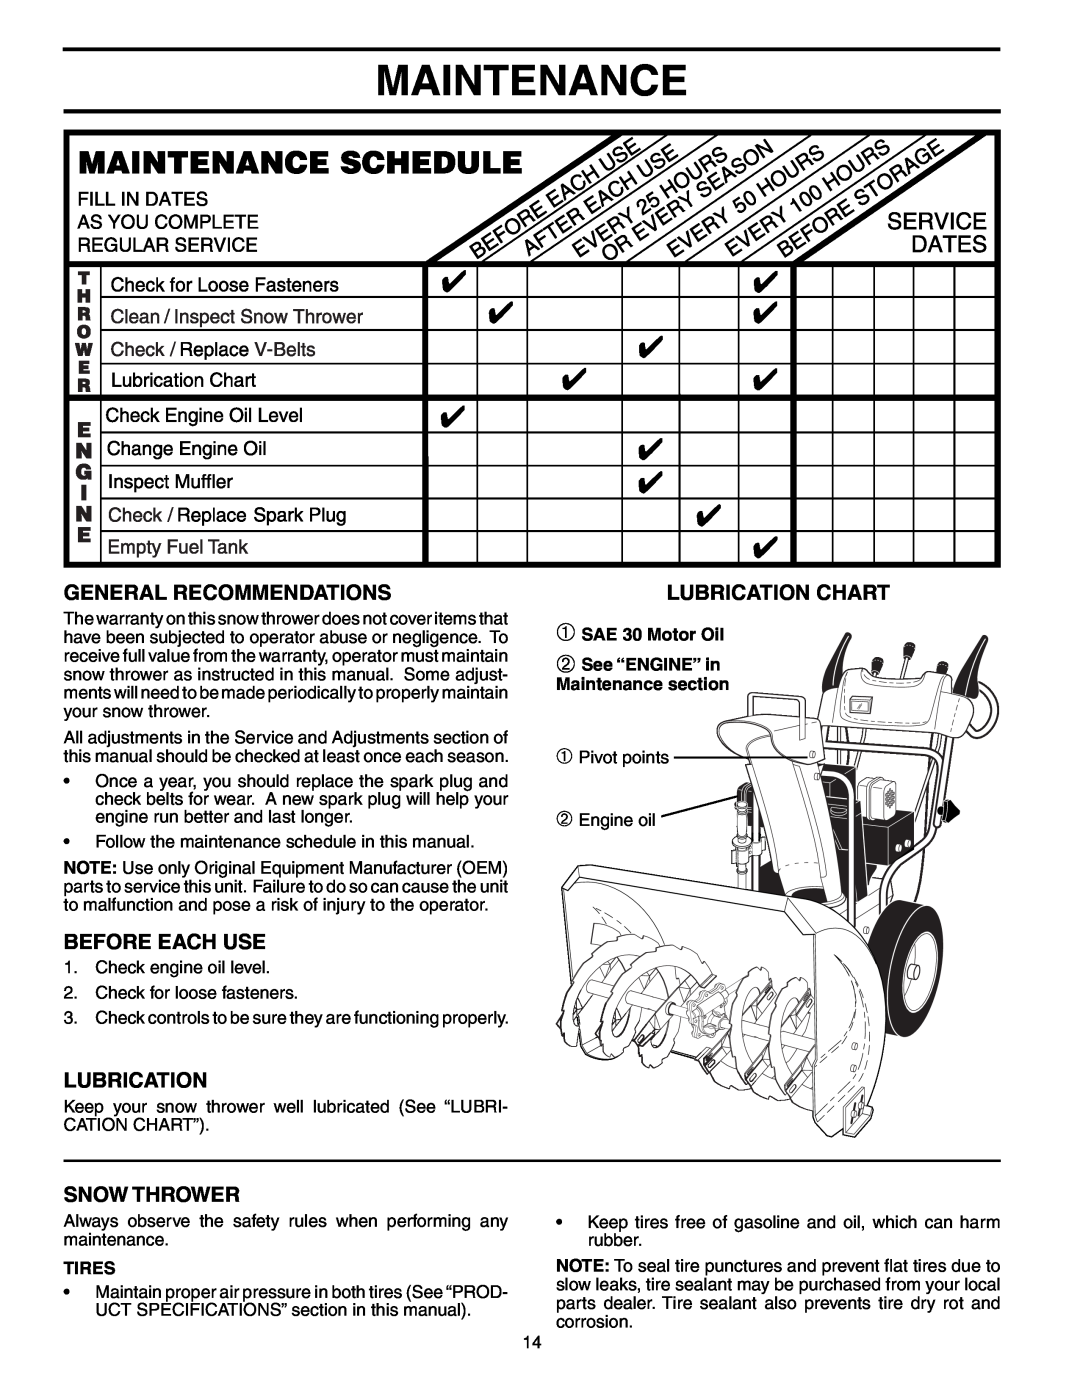 Poulan PO10527ESA Maintenance, General Recommendations, Before Each Use, Snow Thrower, Lubrication Chart, Tires 